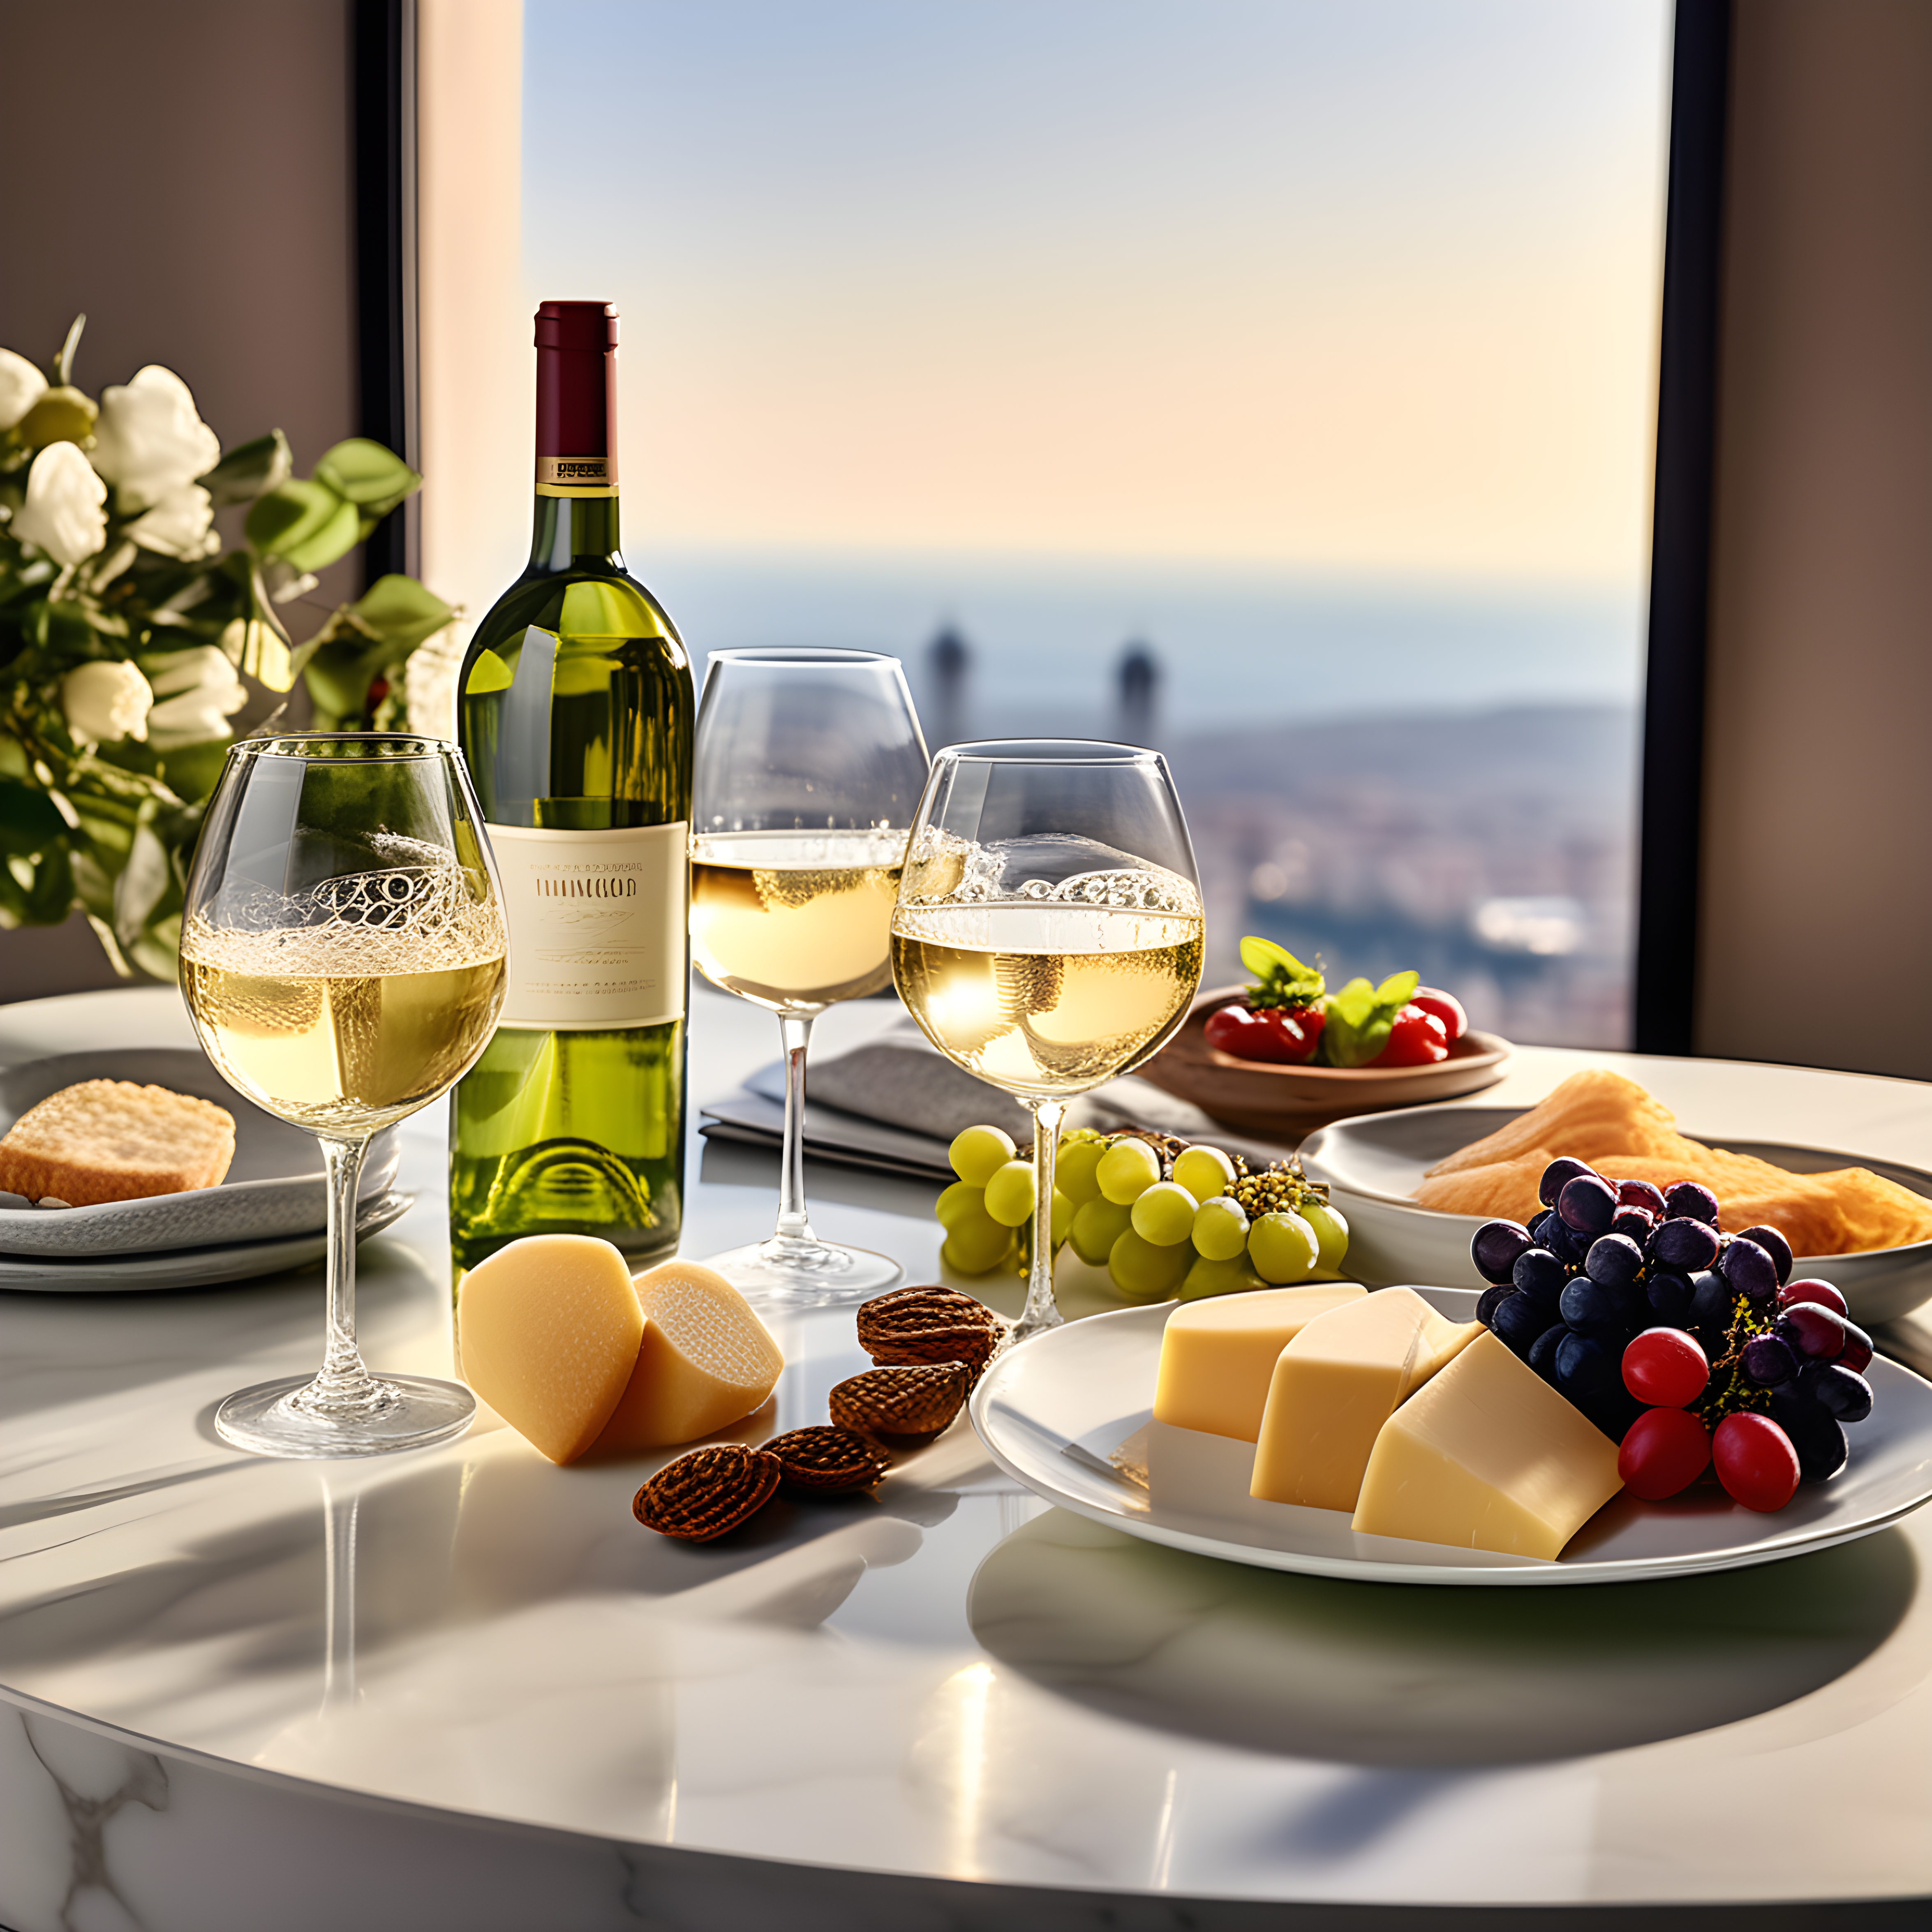 A selection of the best Italian white wines, showcasing bottles and glasses filled with exquisite, high-quality wine.